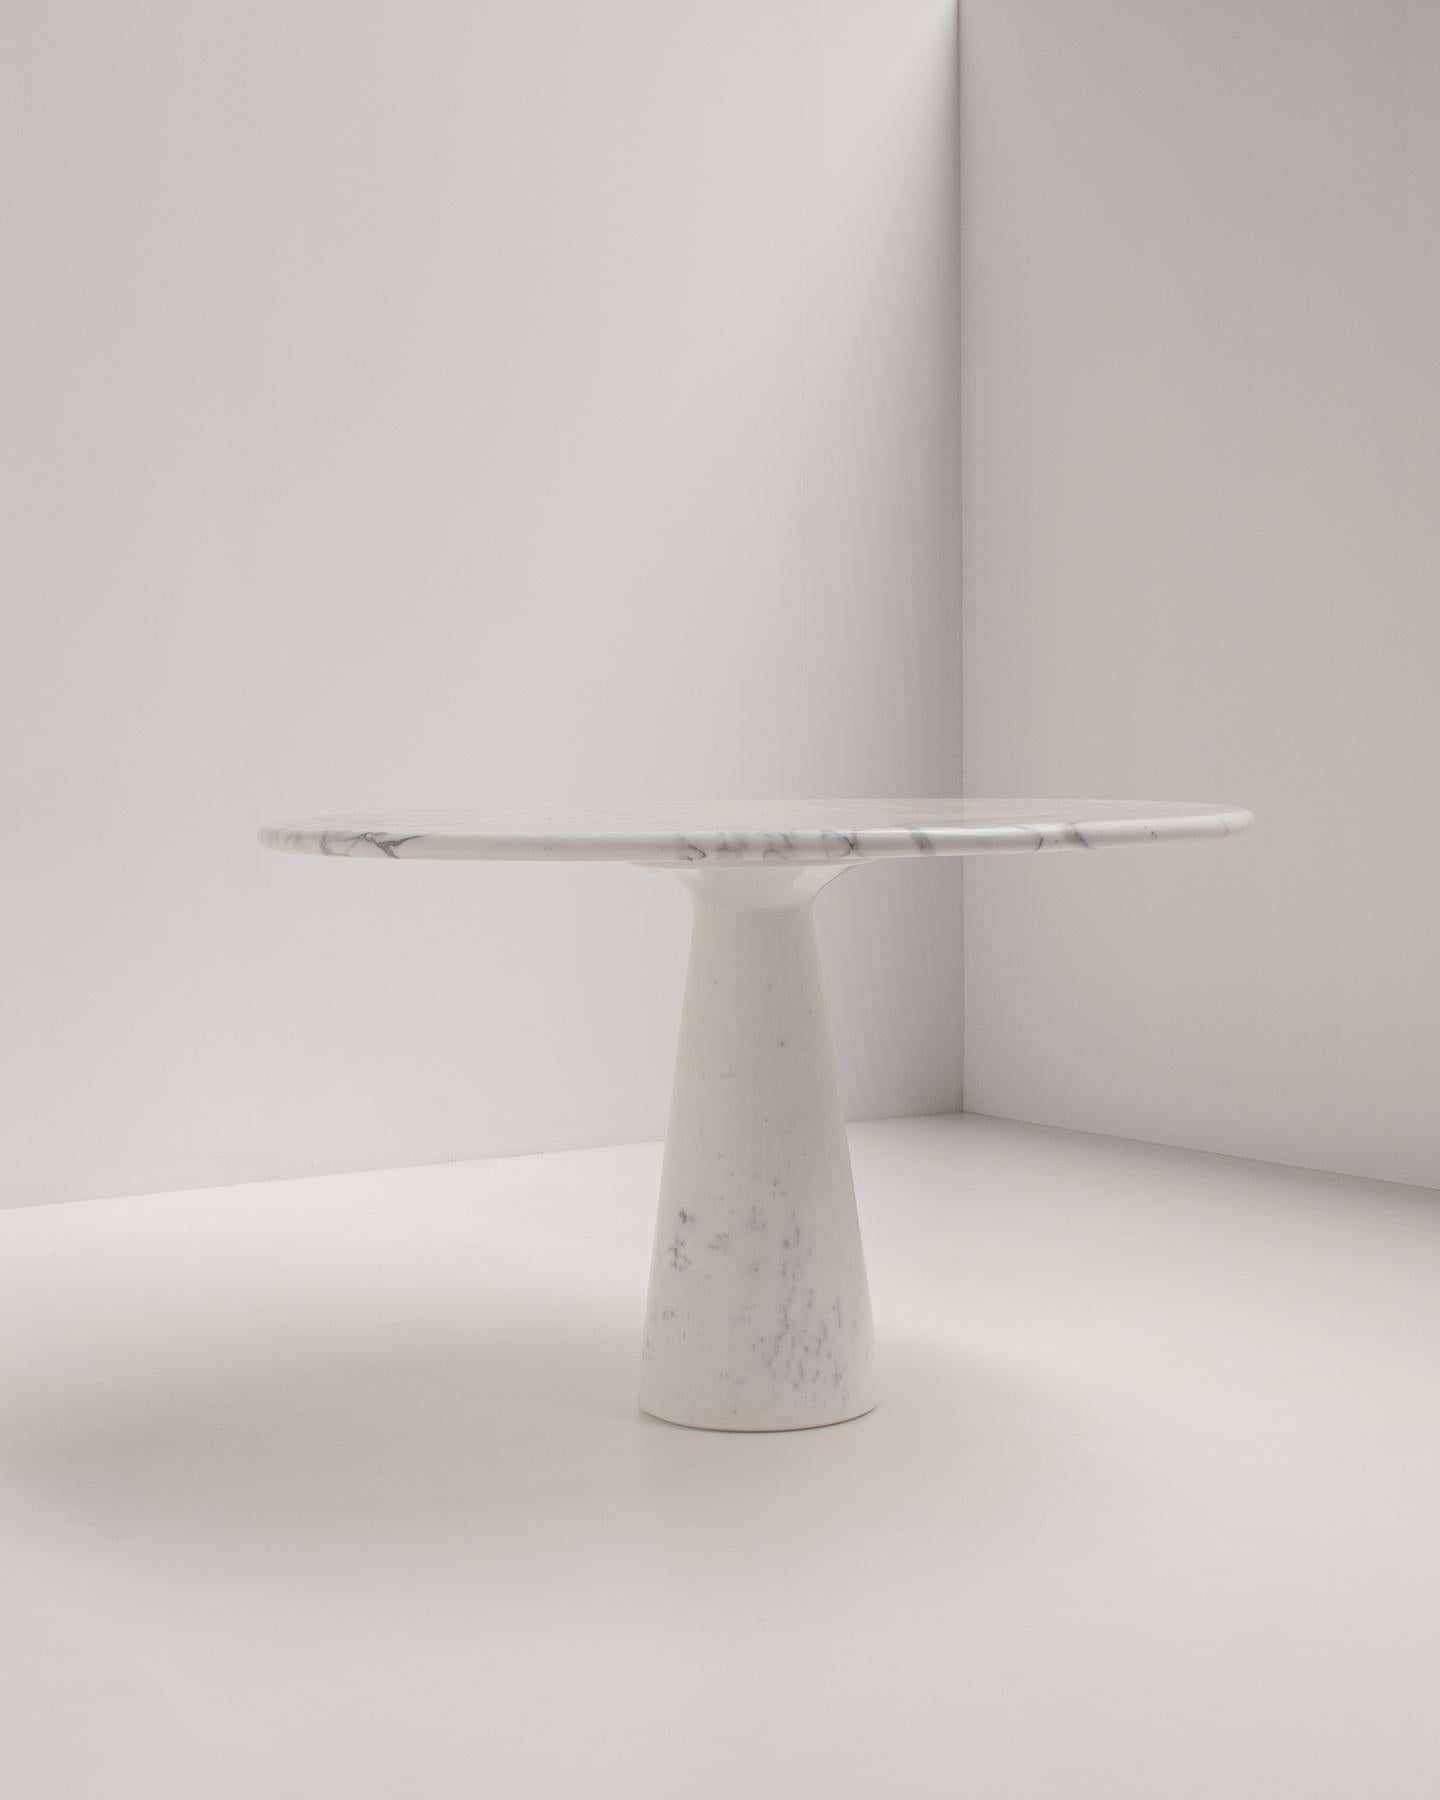 Round dining table, white marble, Italy, 1970s

The table is made of solid Carrara marble and is polished to a satin finish.
The marble has some beautiful veining, but it isn't overpowering, making it a very sophisticated piece.

This table can be